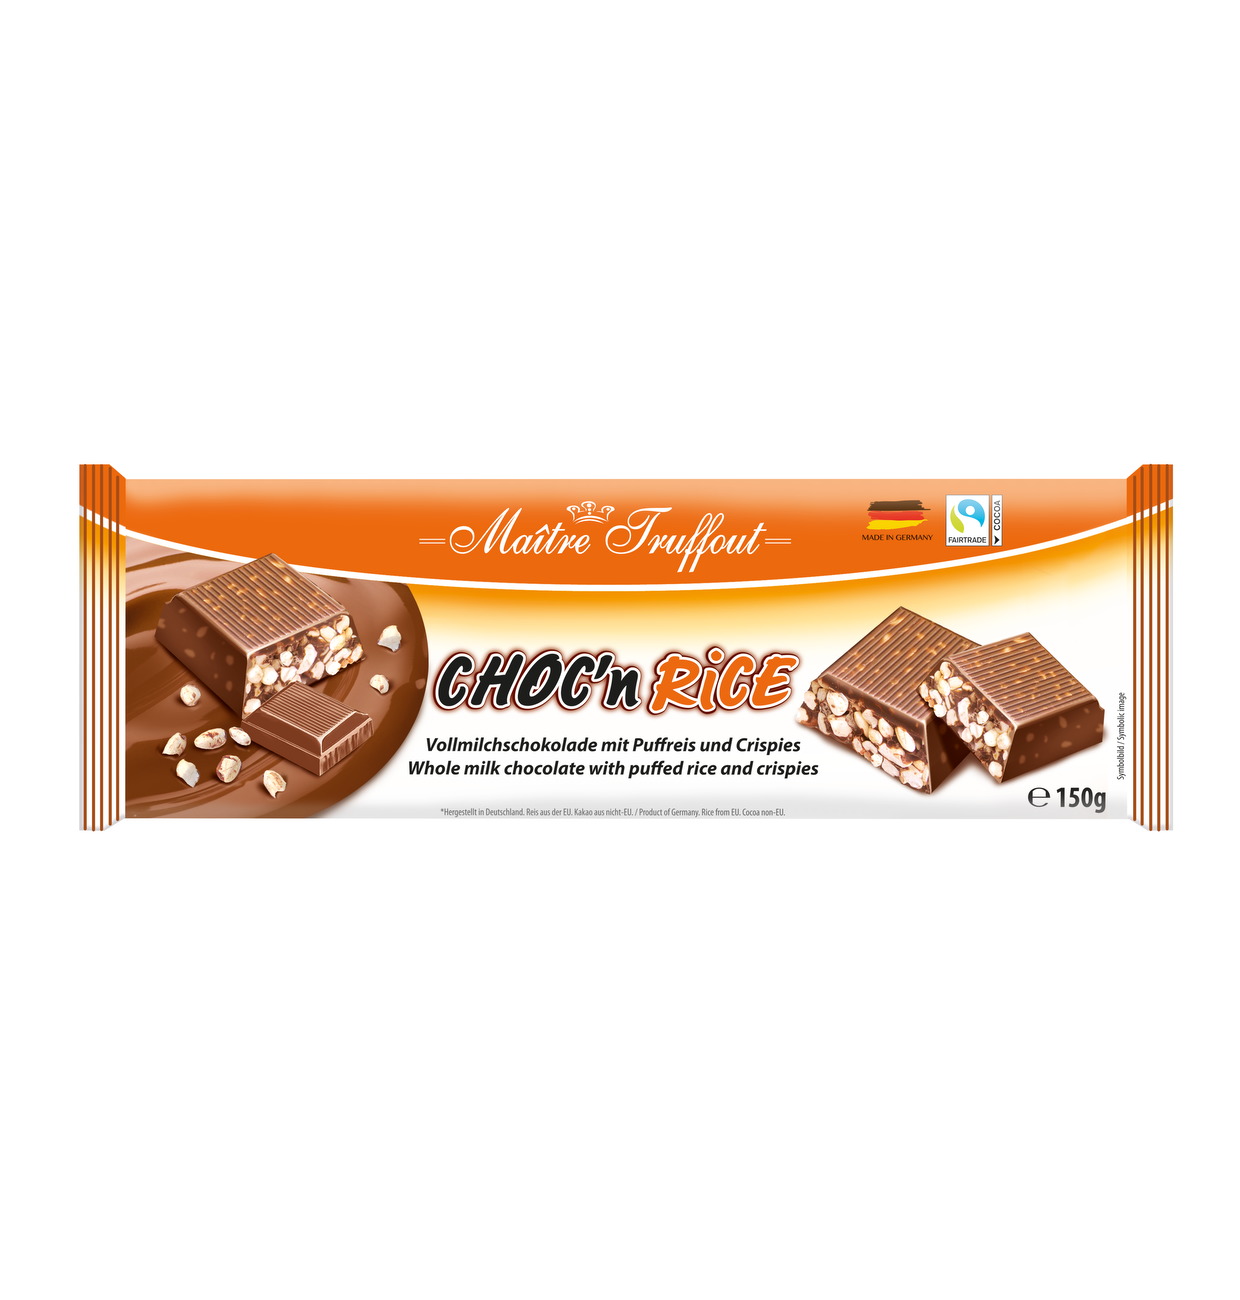 Choc´n Rice Milk chocolate with puffed rice and extruded cereals (32 x 150g)